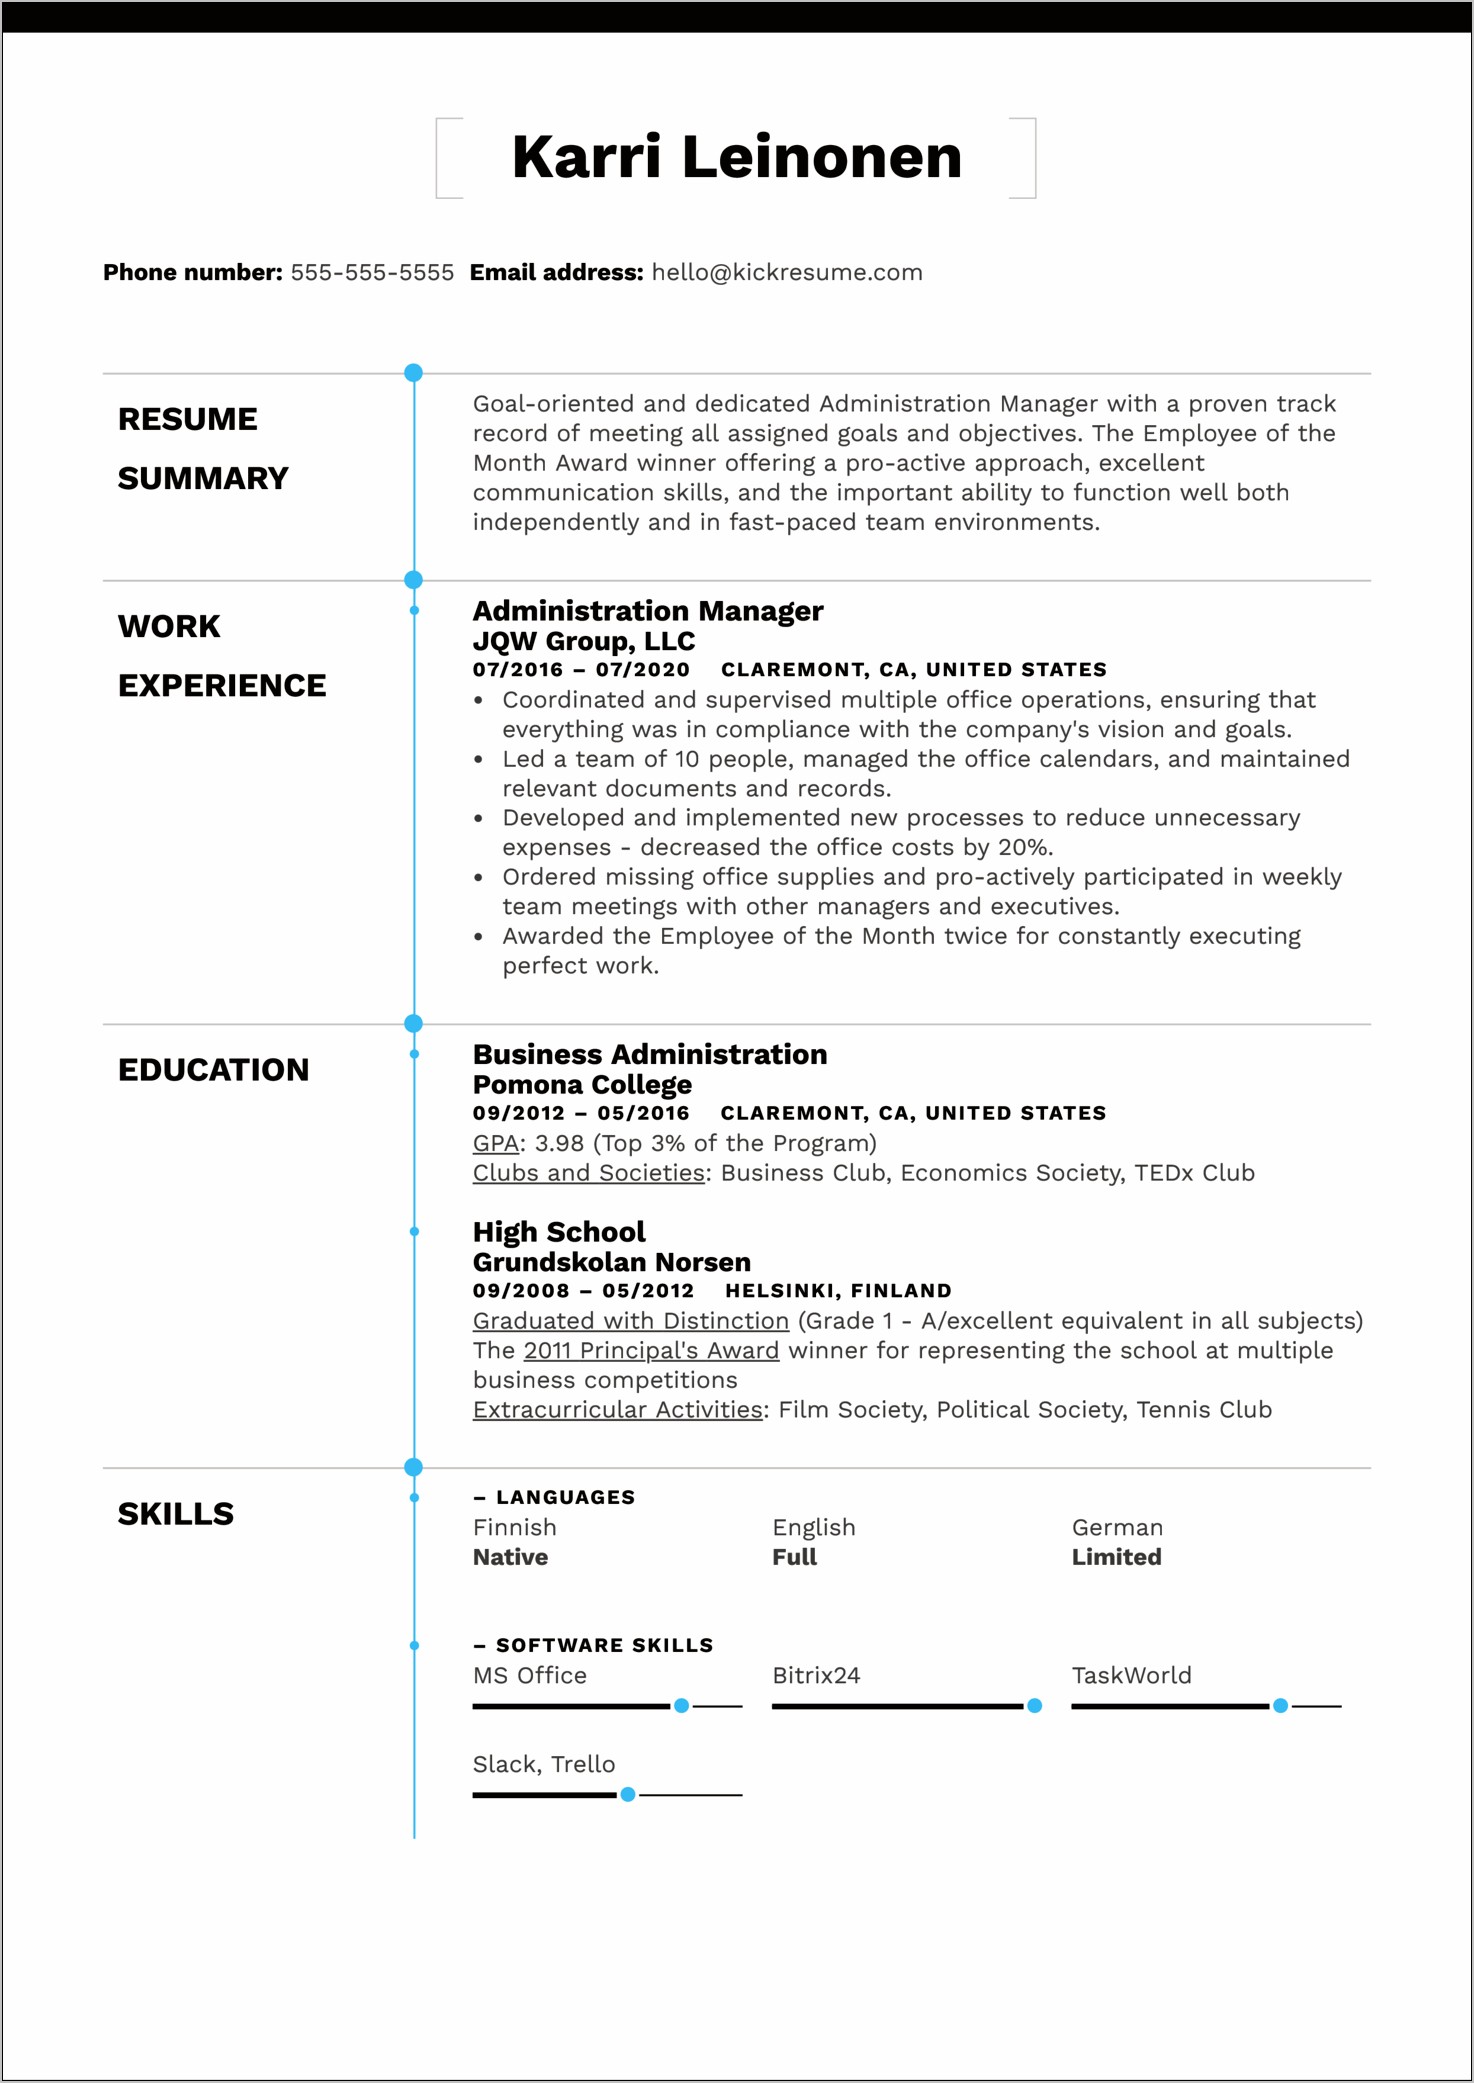 Example Of Business Administration Resume